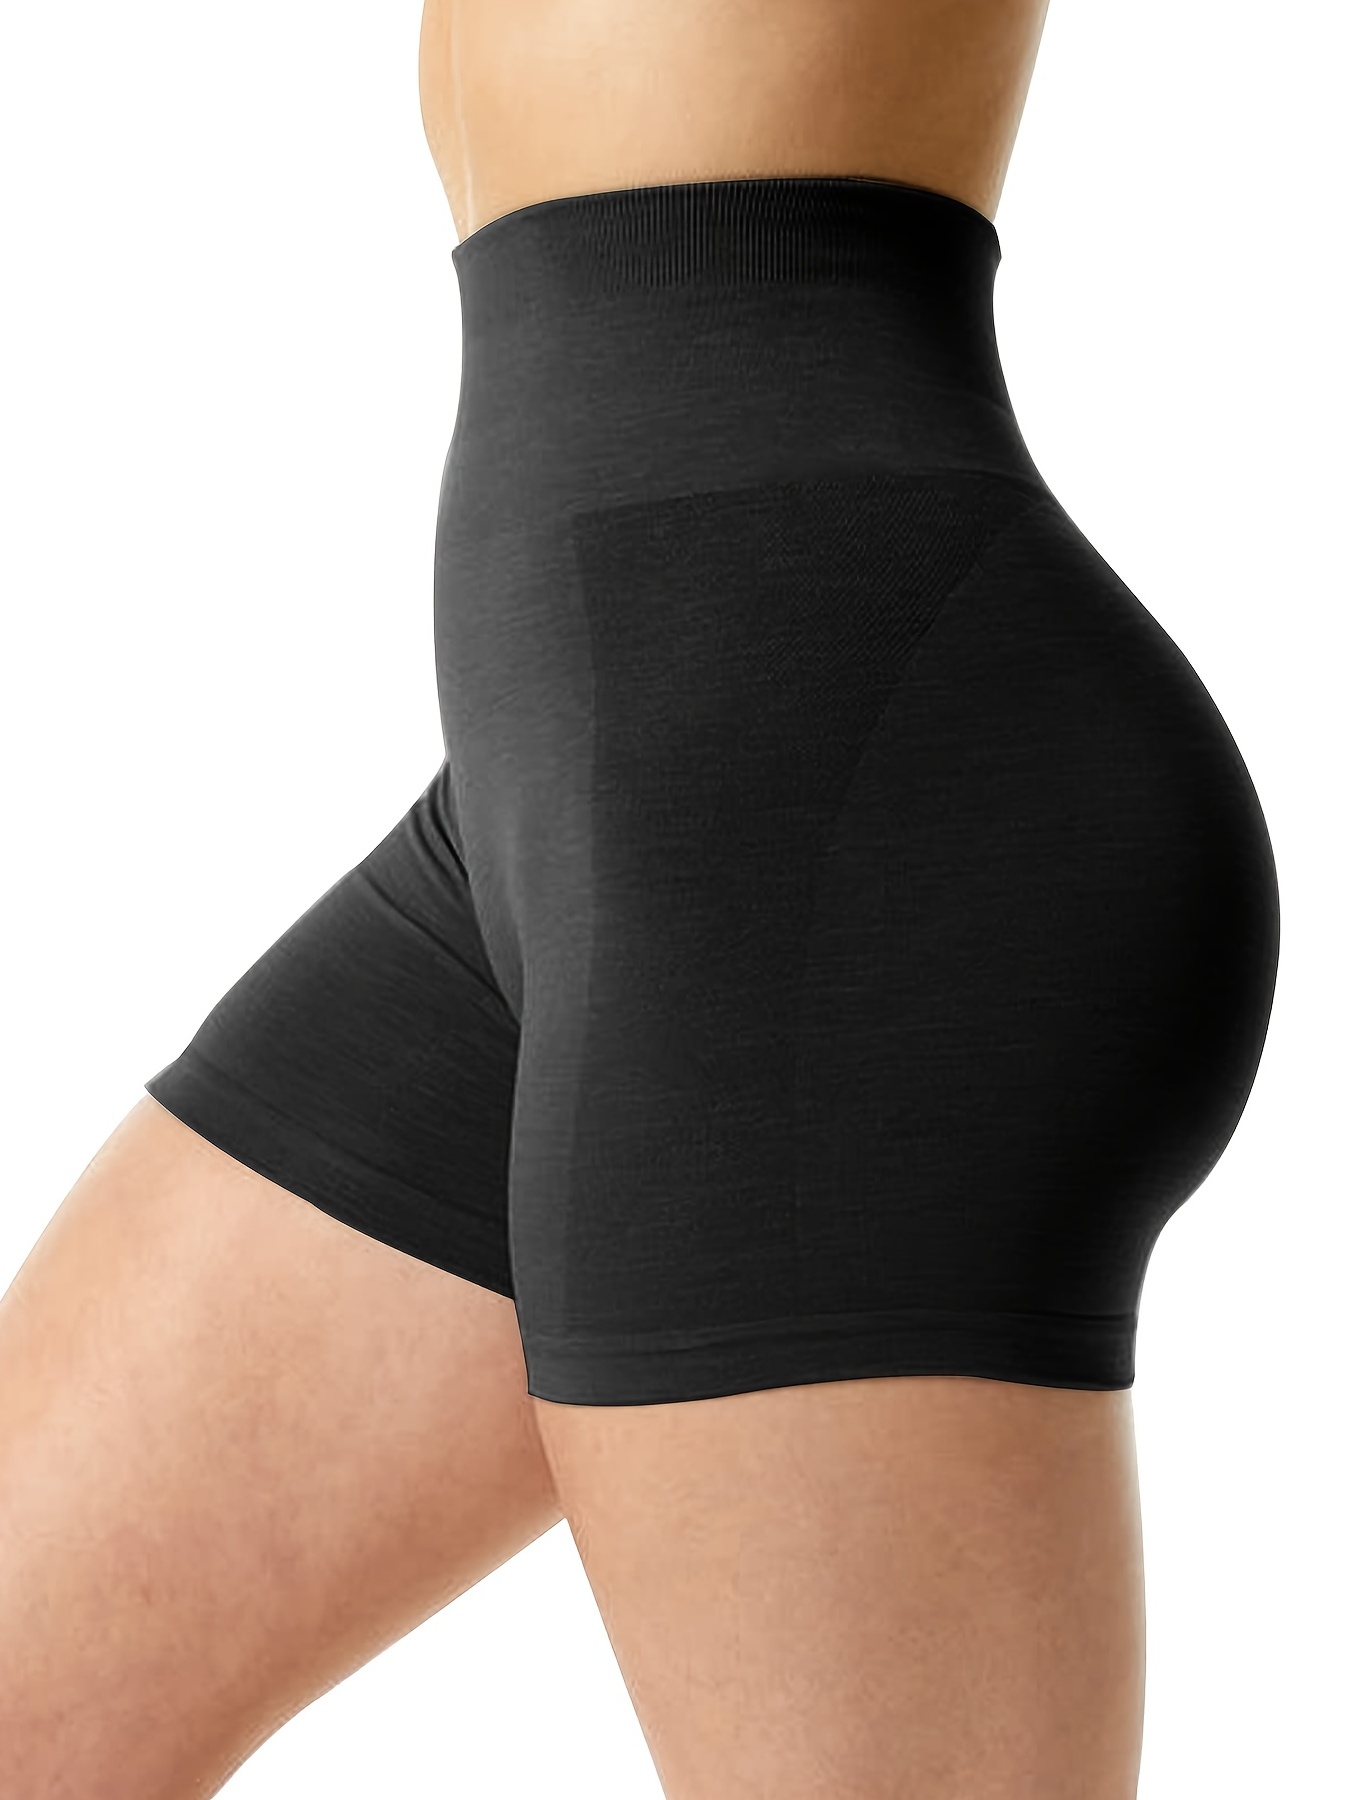 BeeHouse Womens High Waist Gym Shorts For Butt Lifting And Quick